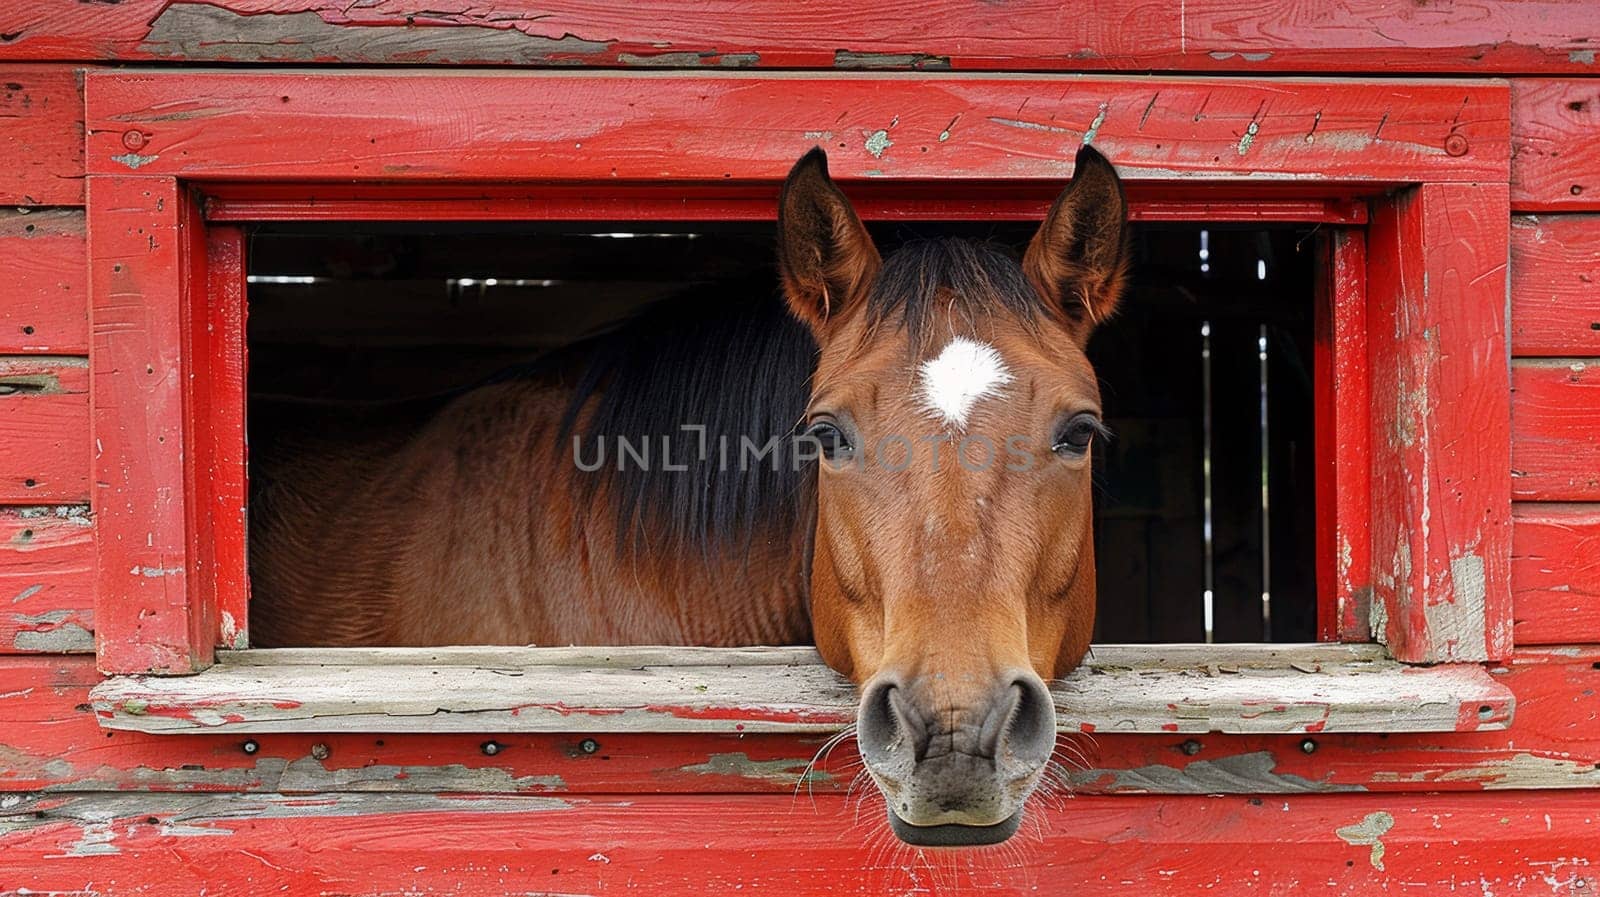 A horse sticking its head out of a red barn window